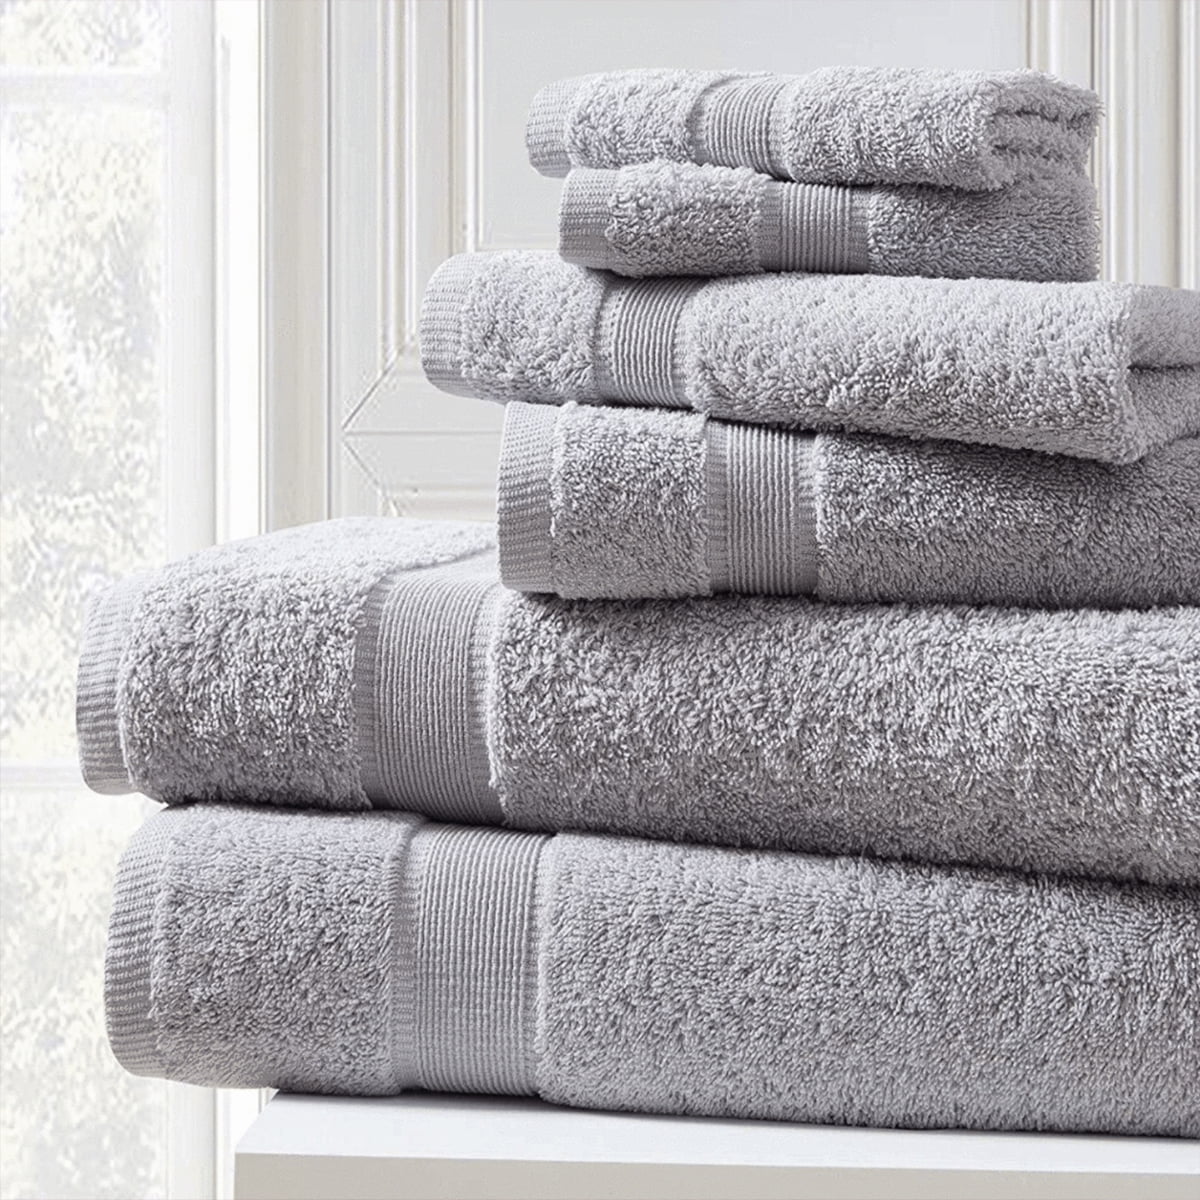 Towel Set  Shop Towels, Robes and Bath & Body from The Peabody at